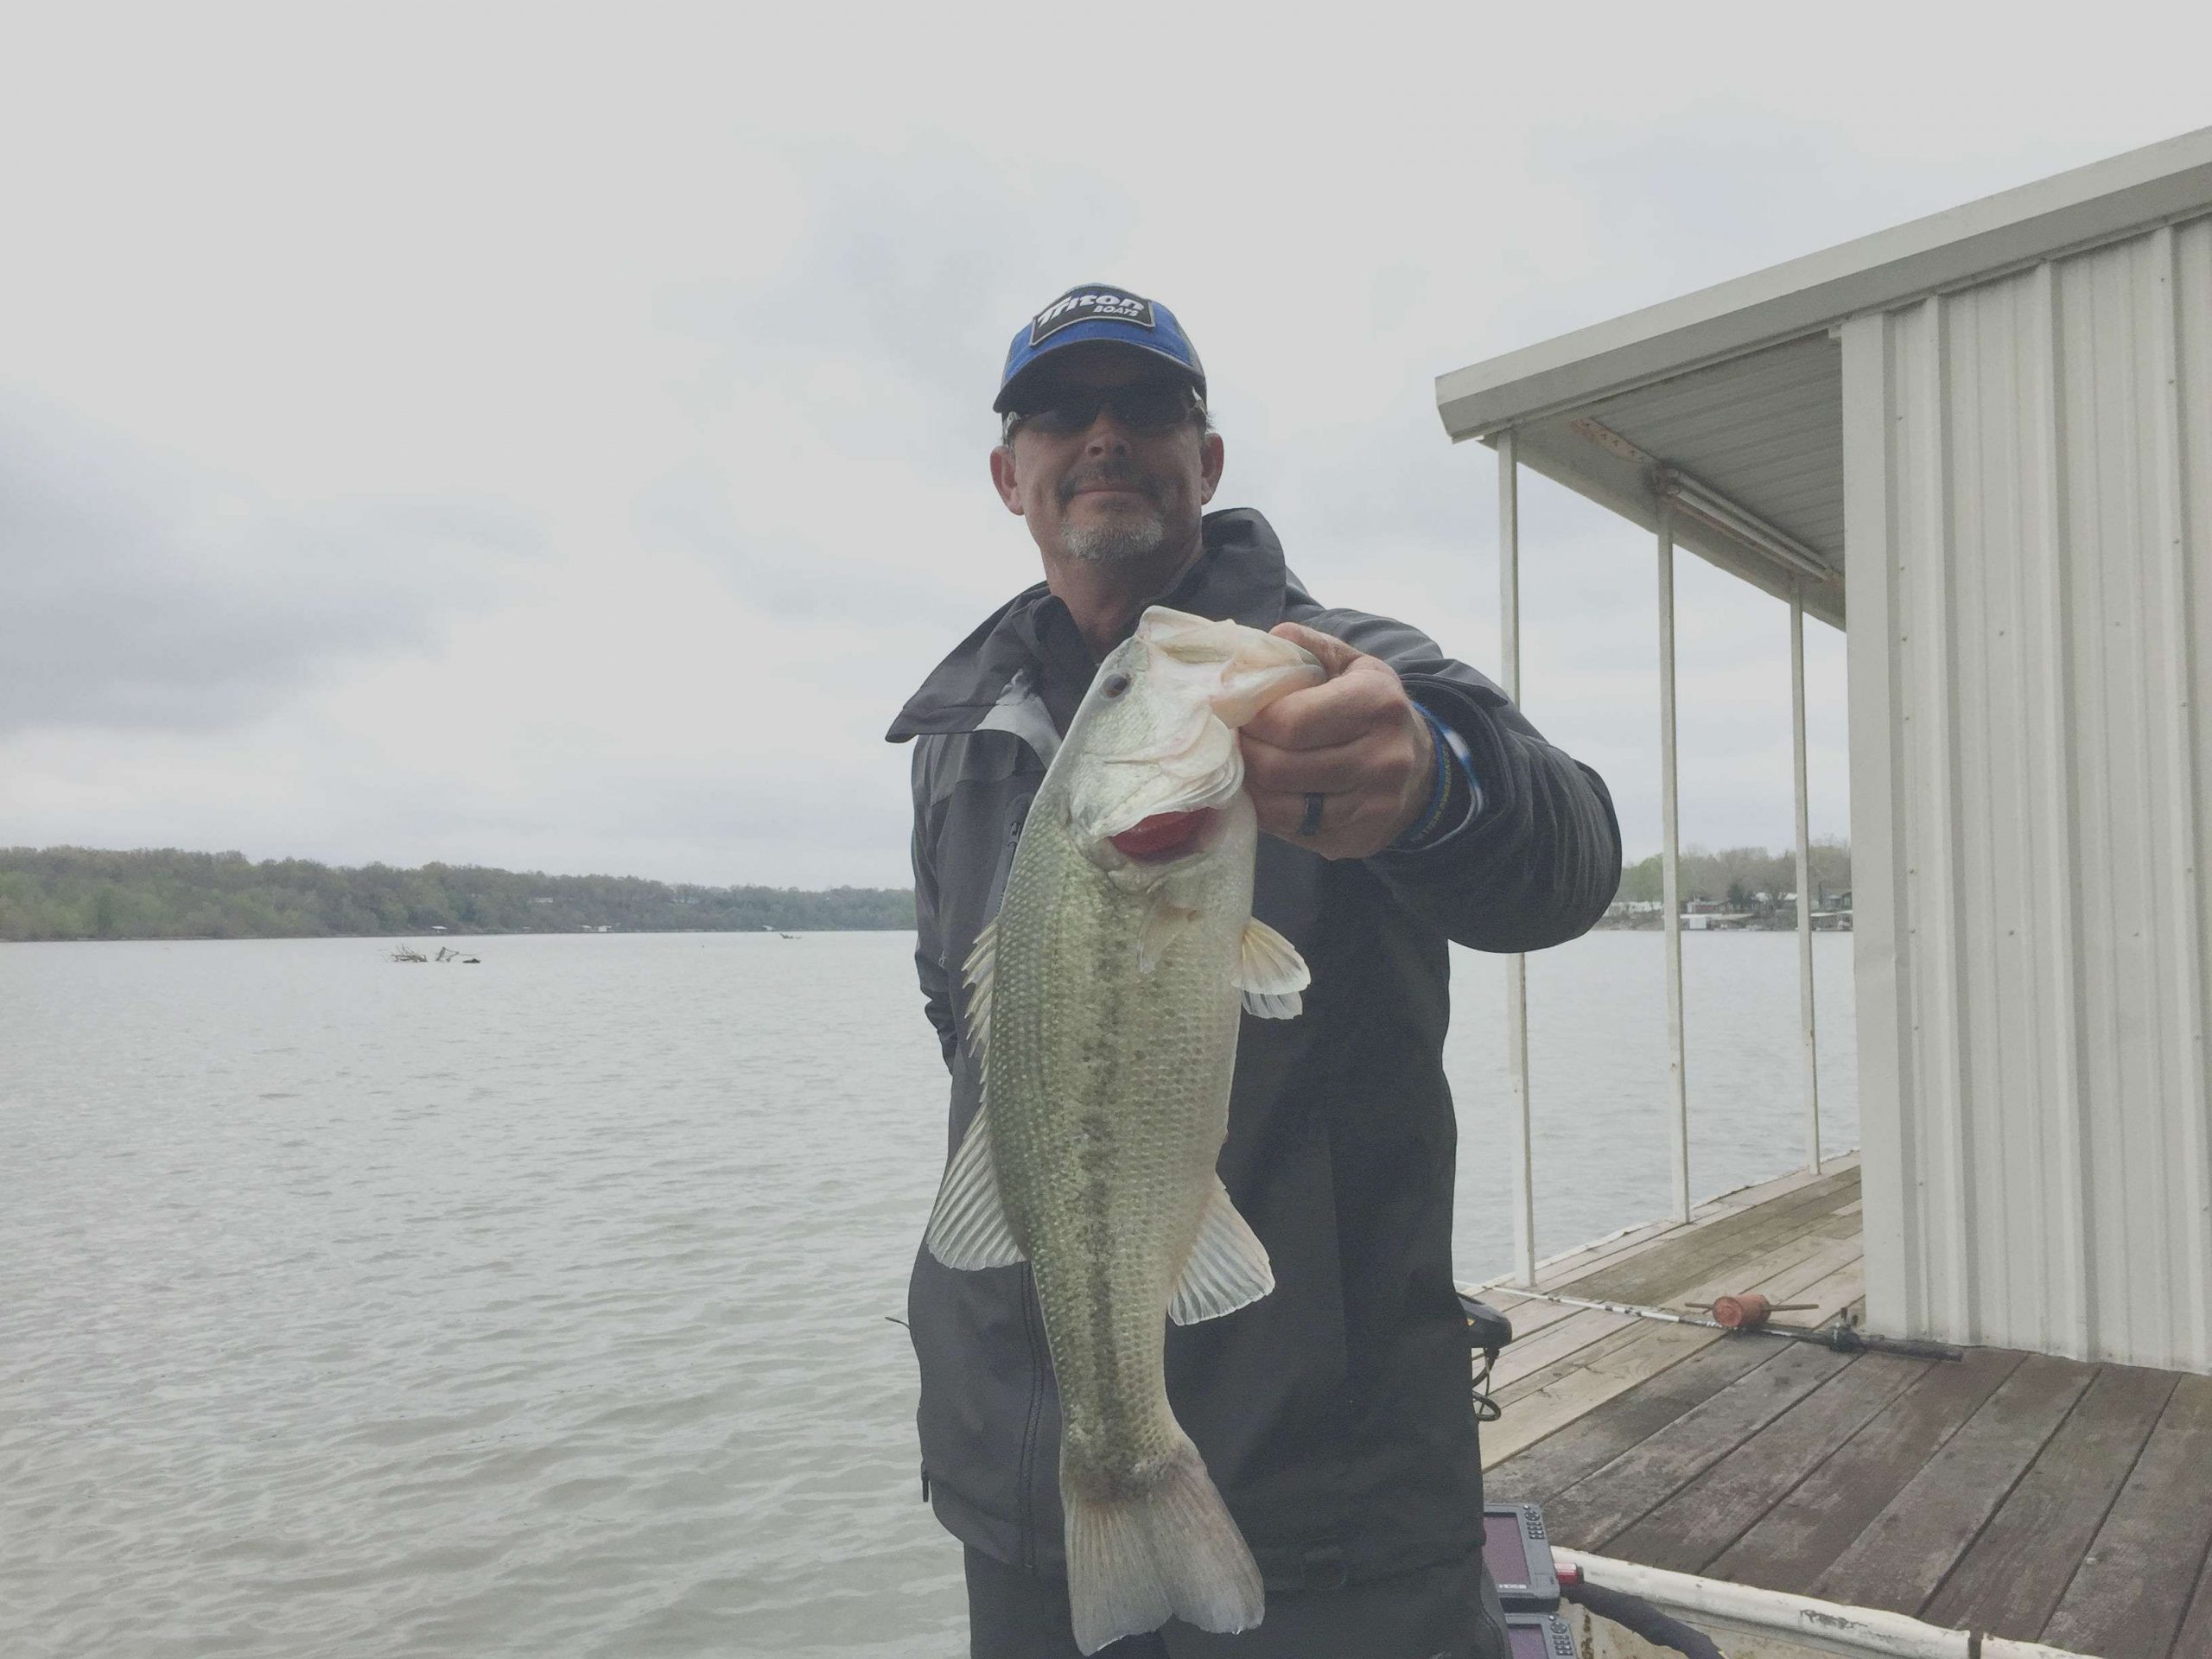 Bill Weidler swings another nice one in the boat.